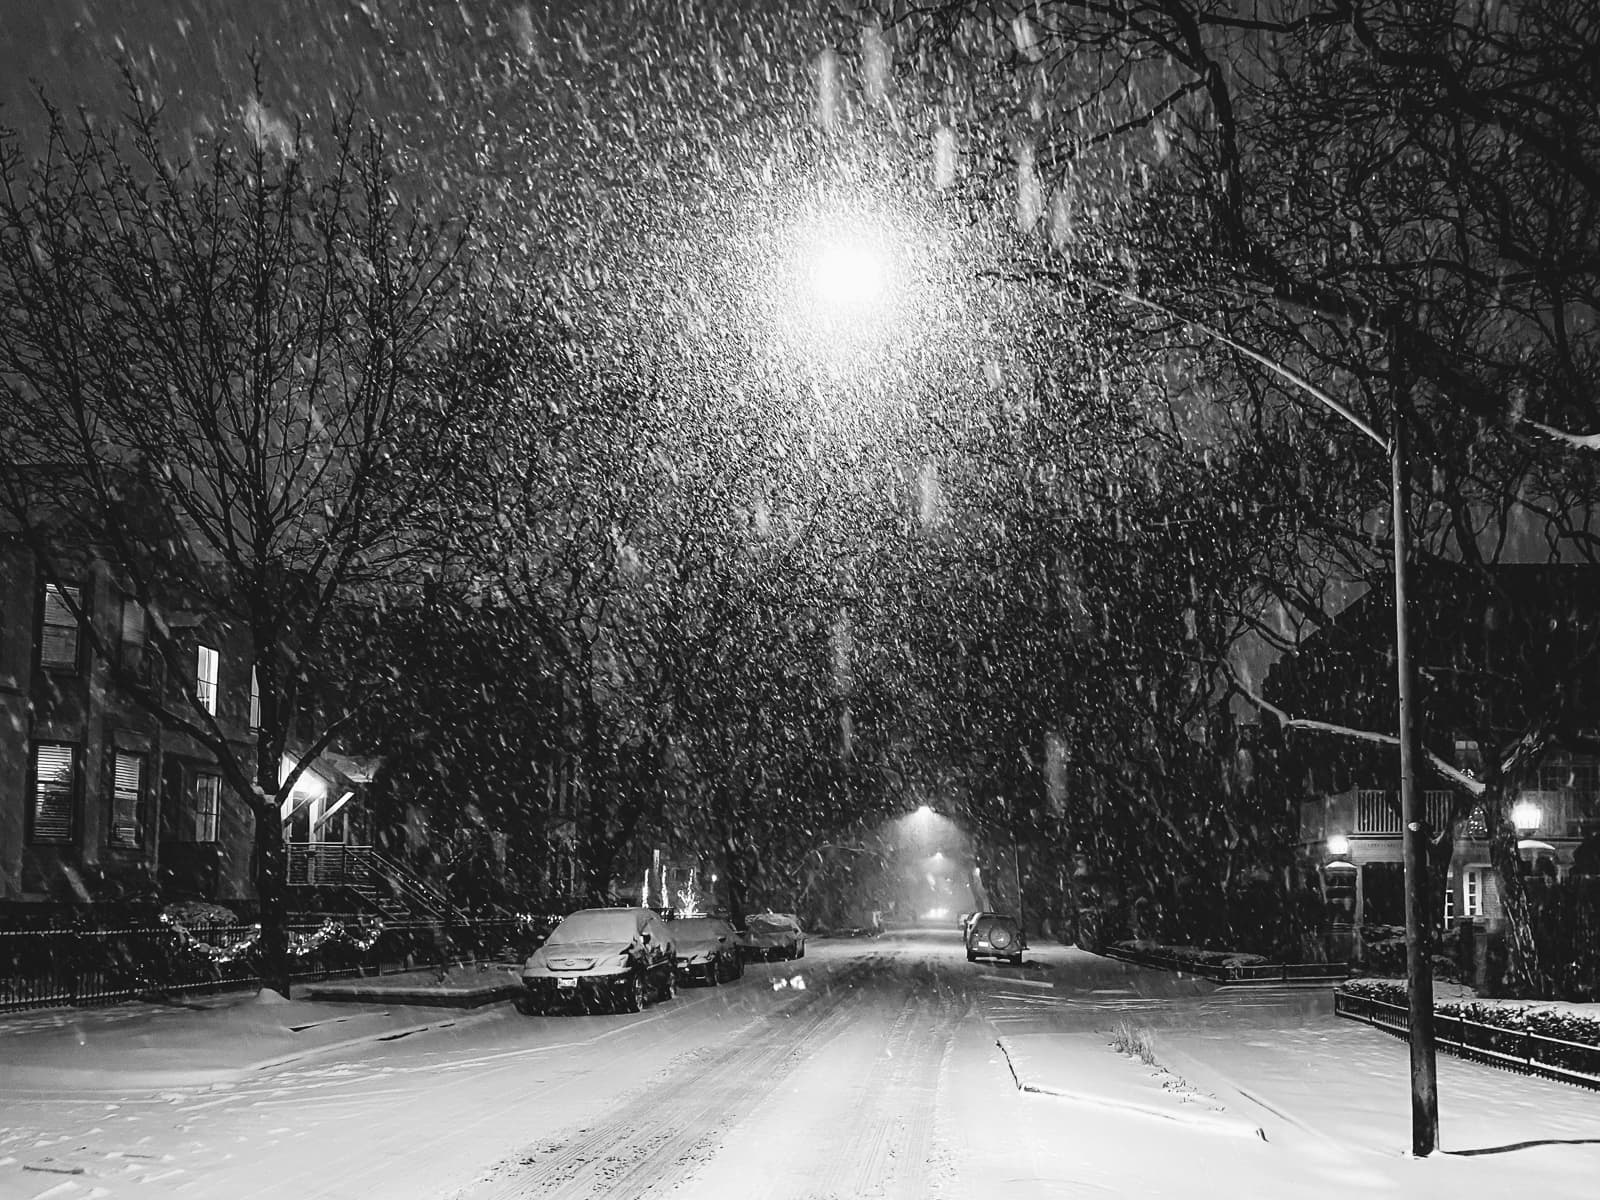 Snowing in the empty streets of Chicago at Night, 2020